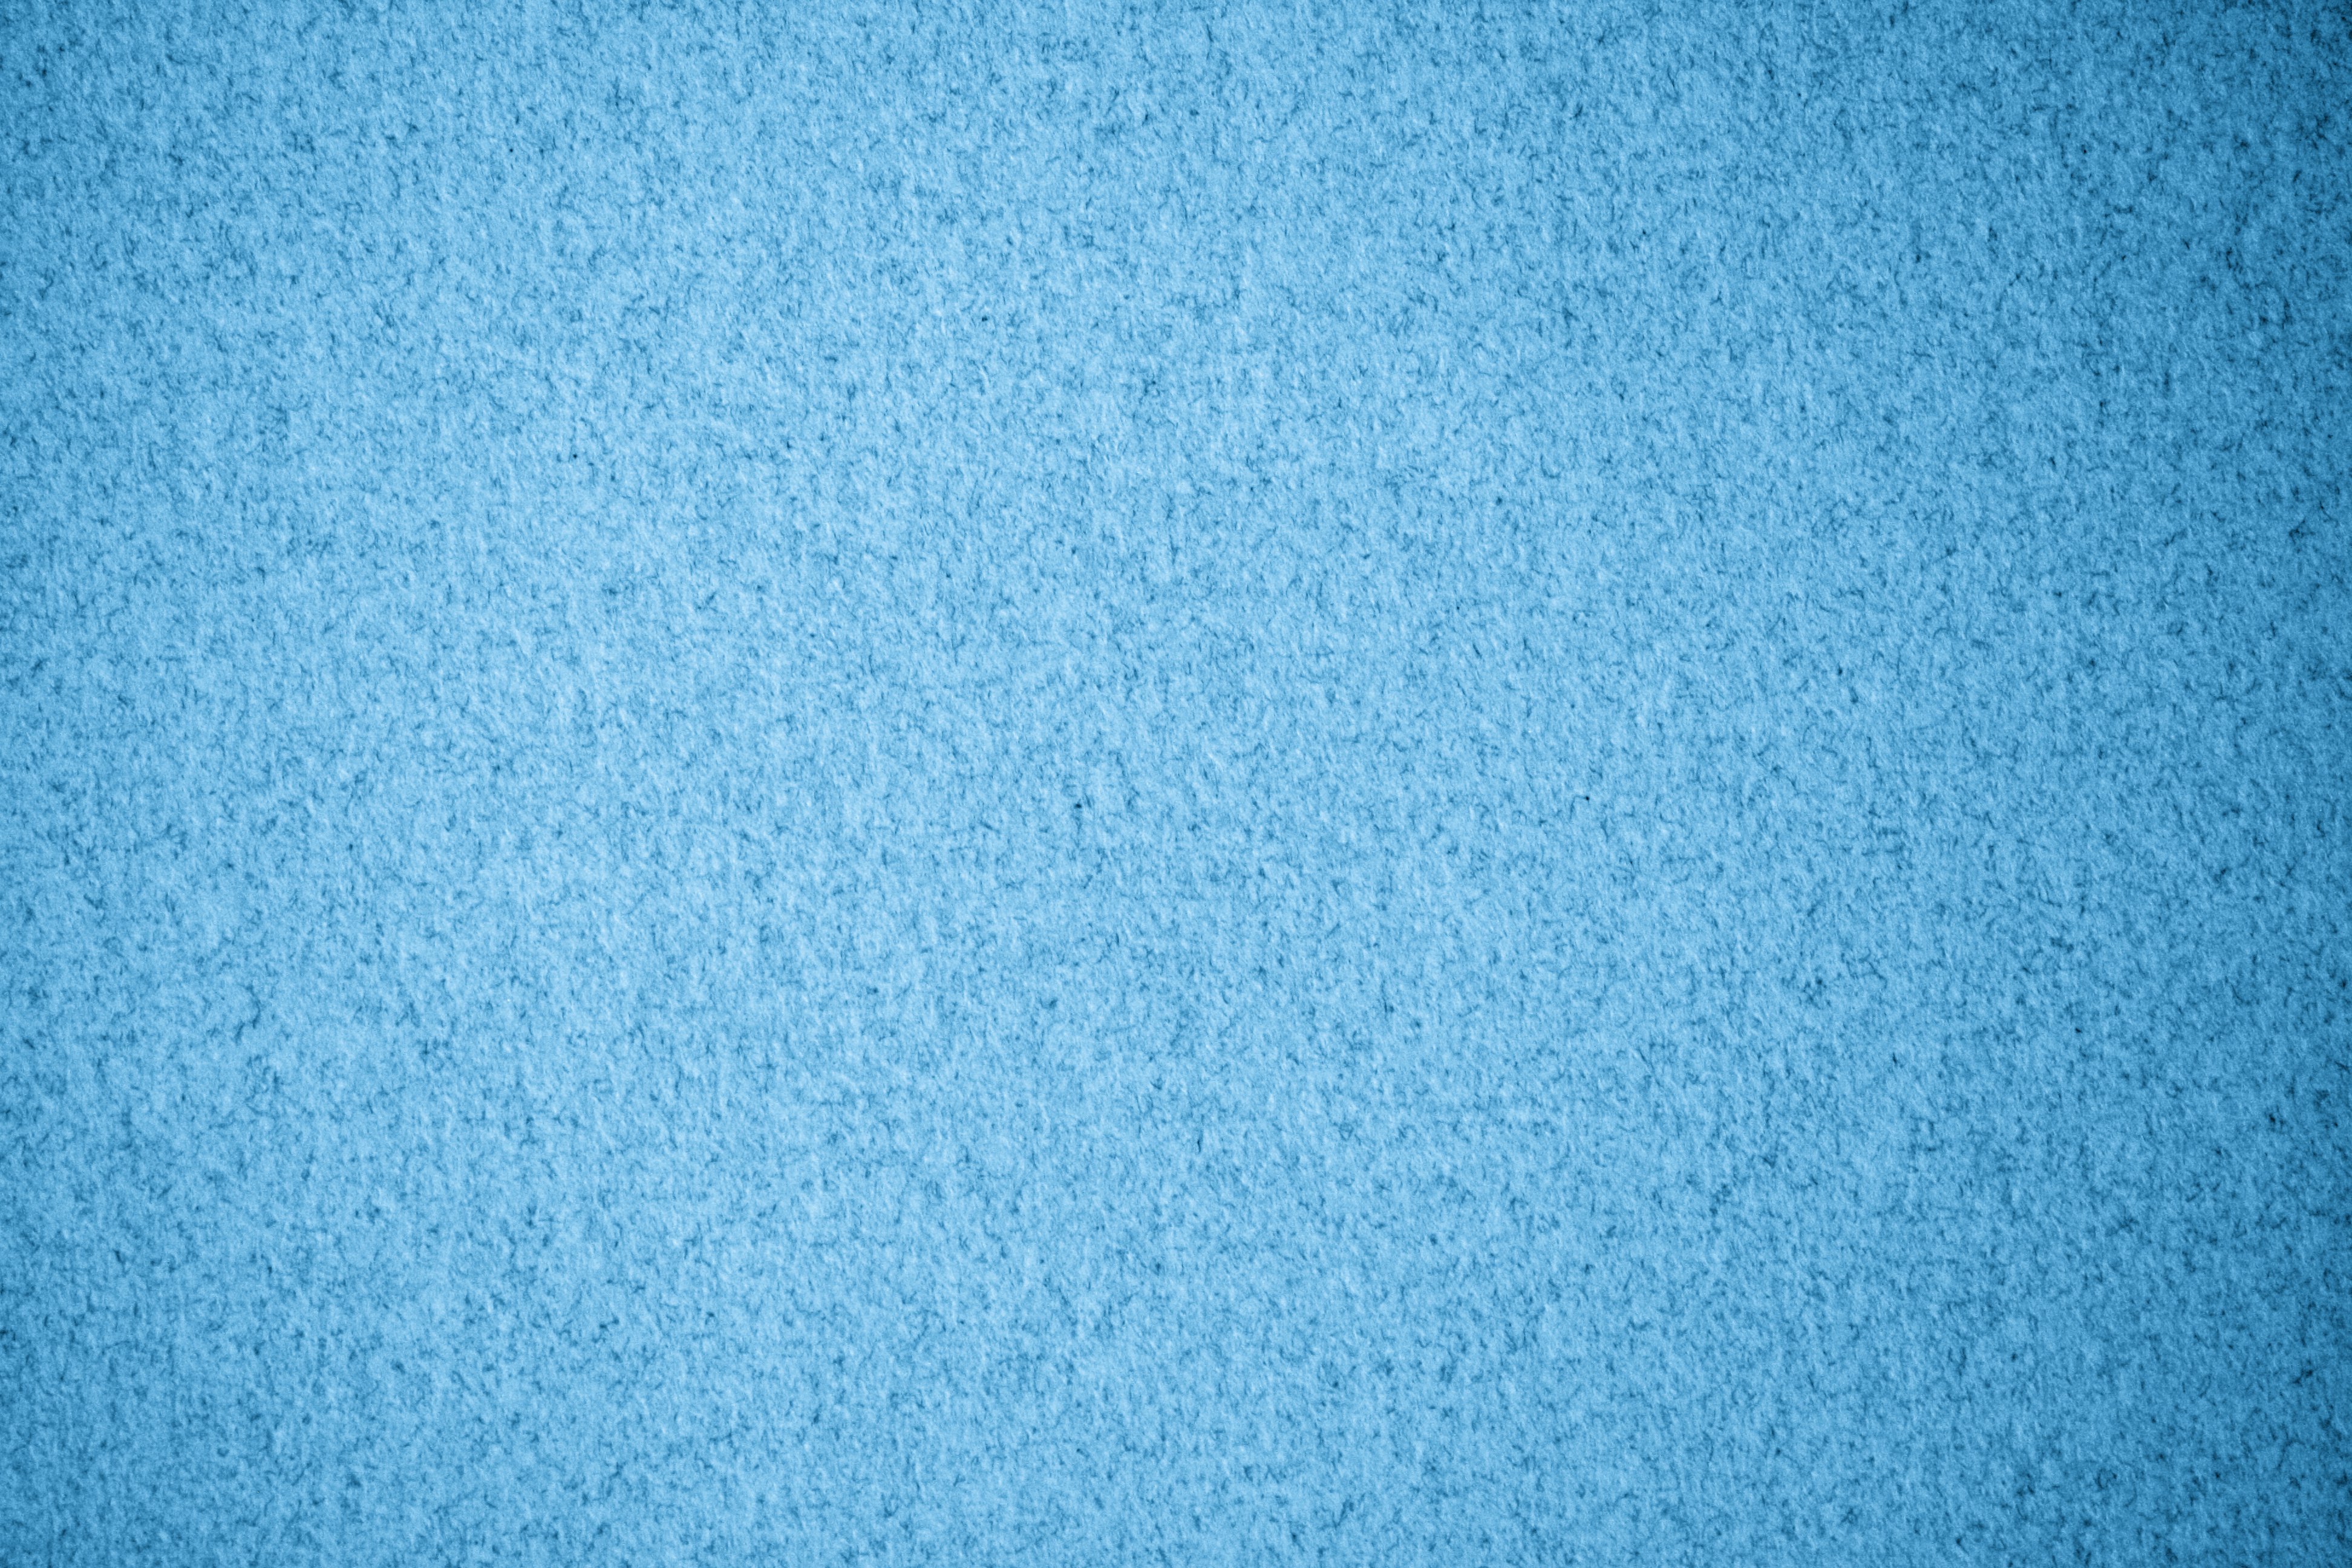 Sky Blue Speckled Paper Texture Picture, Free Photograph